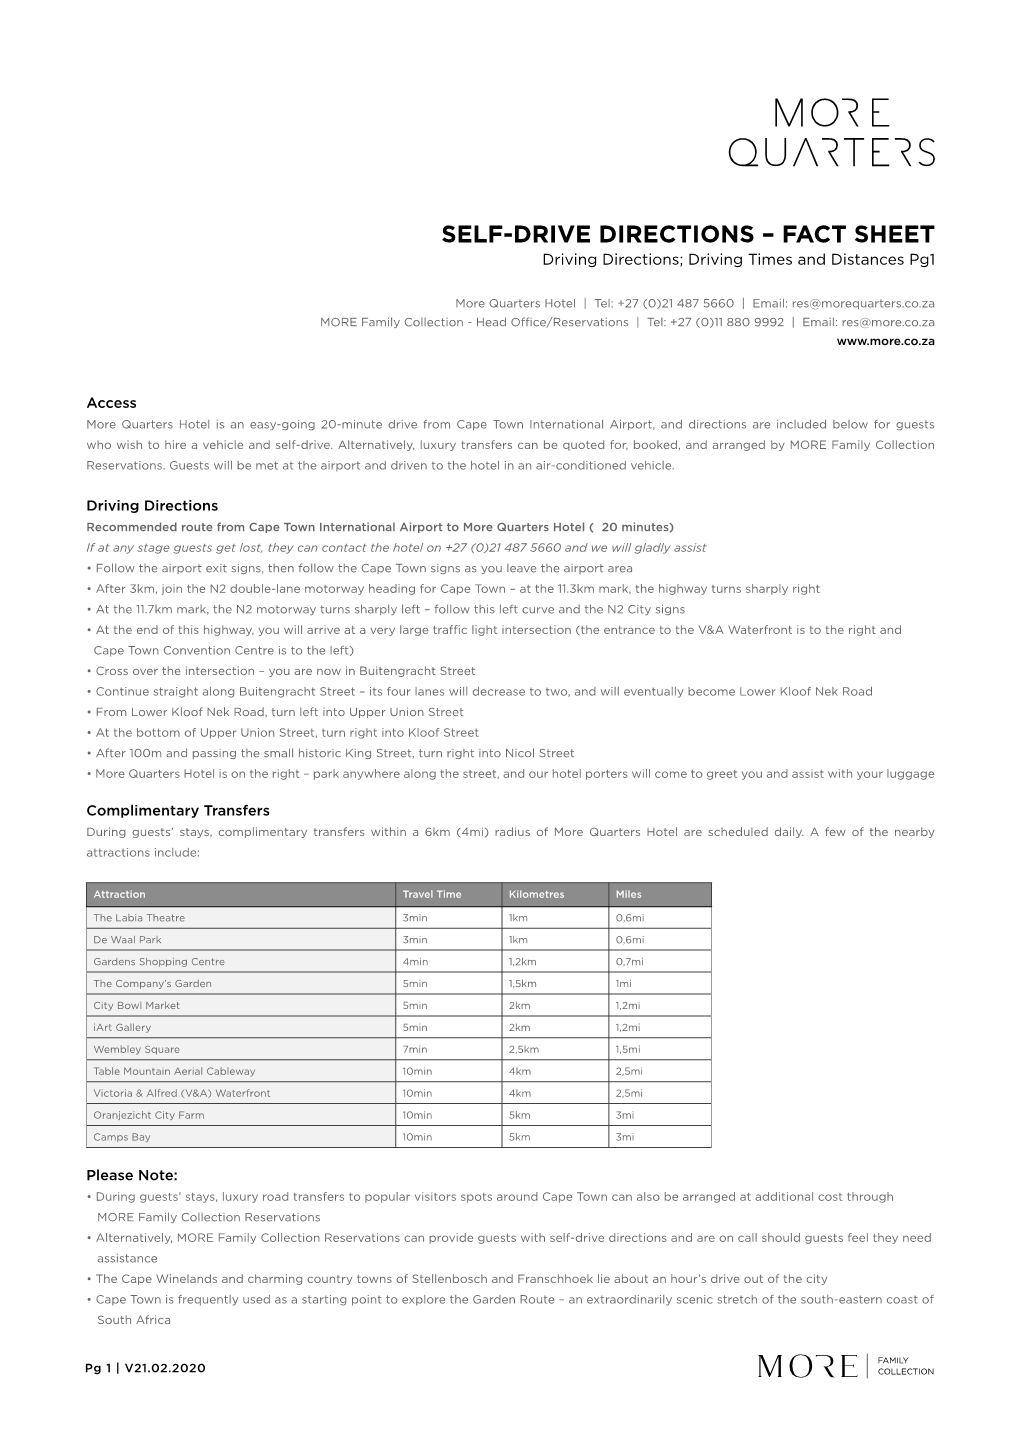 SELF-DRIVE DIRECTIONS – FACT SHEET Driving Directions; Driving Times and Distances Pg1